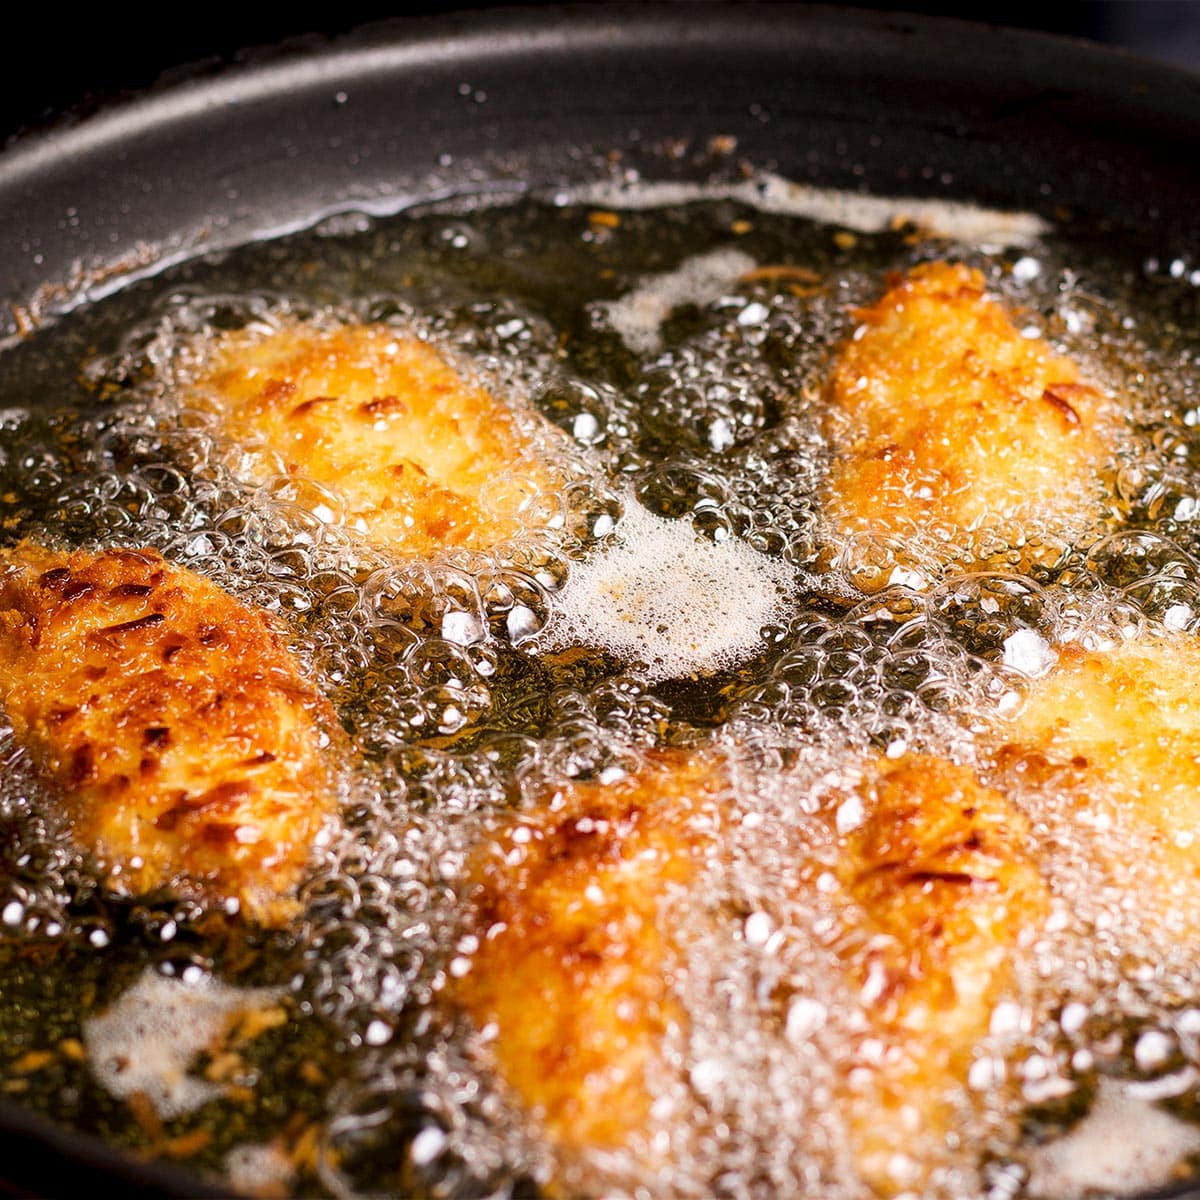 Pieces of coconut and panko breaded chicken frying in oil in a skillet set on a stovetop.